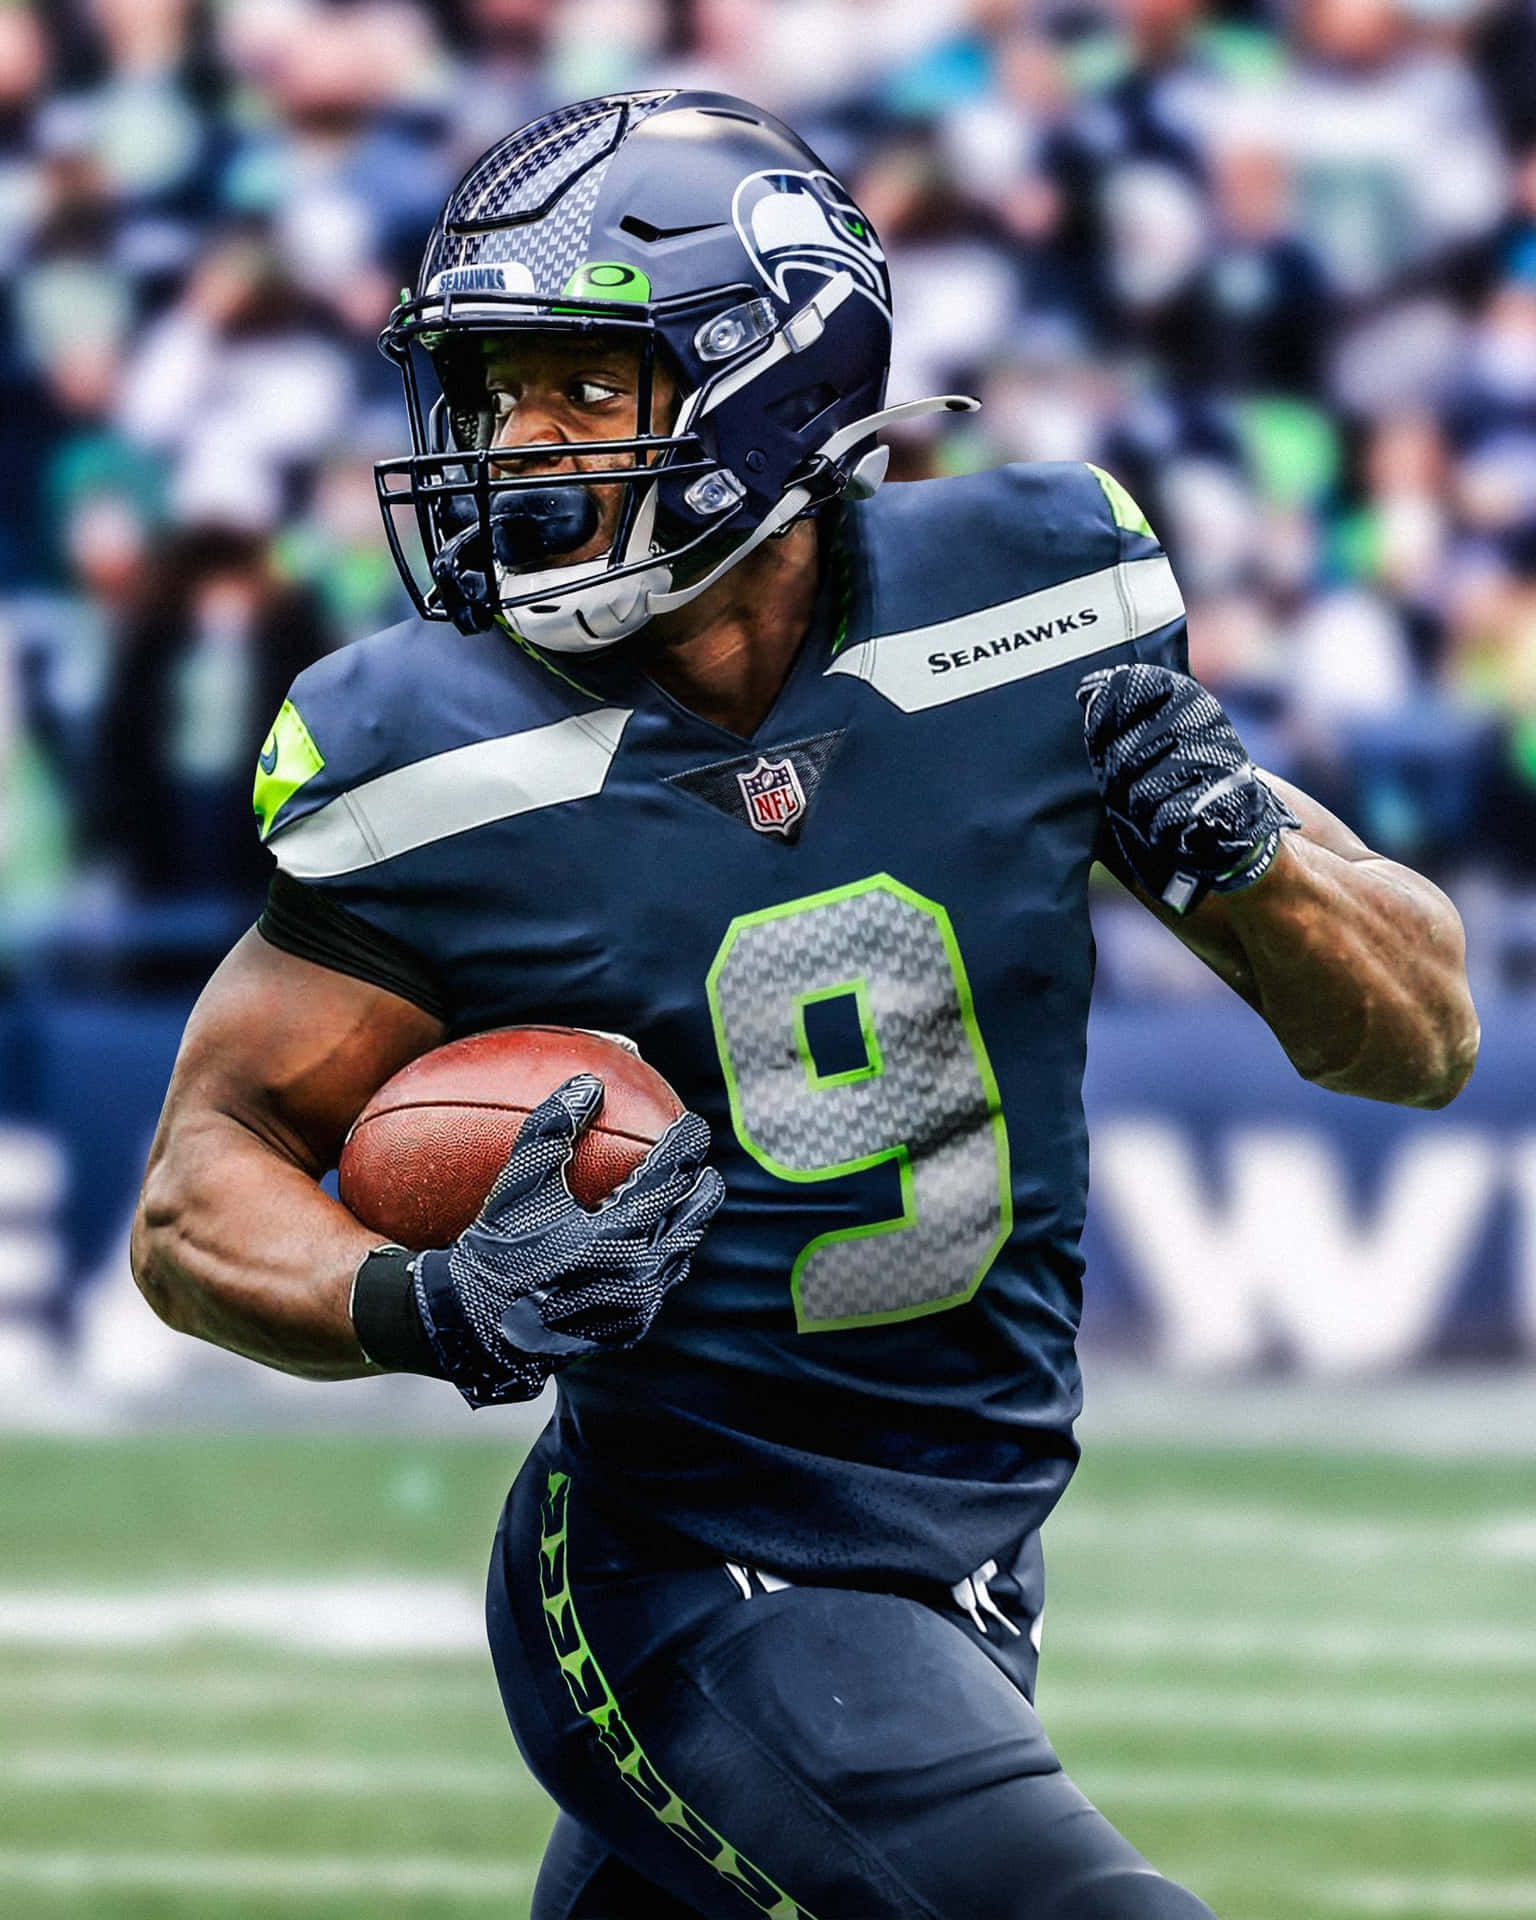 Seahawks Player Number9 In Action Wallpaper